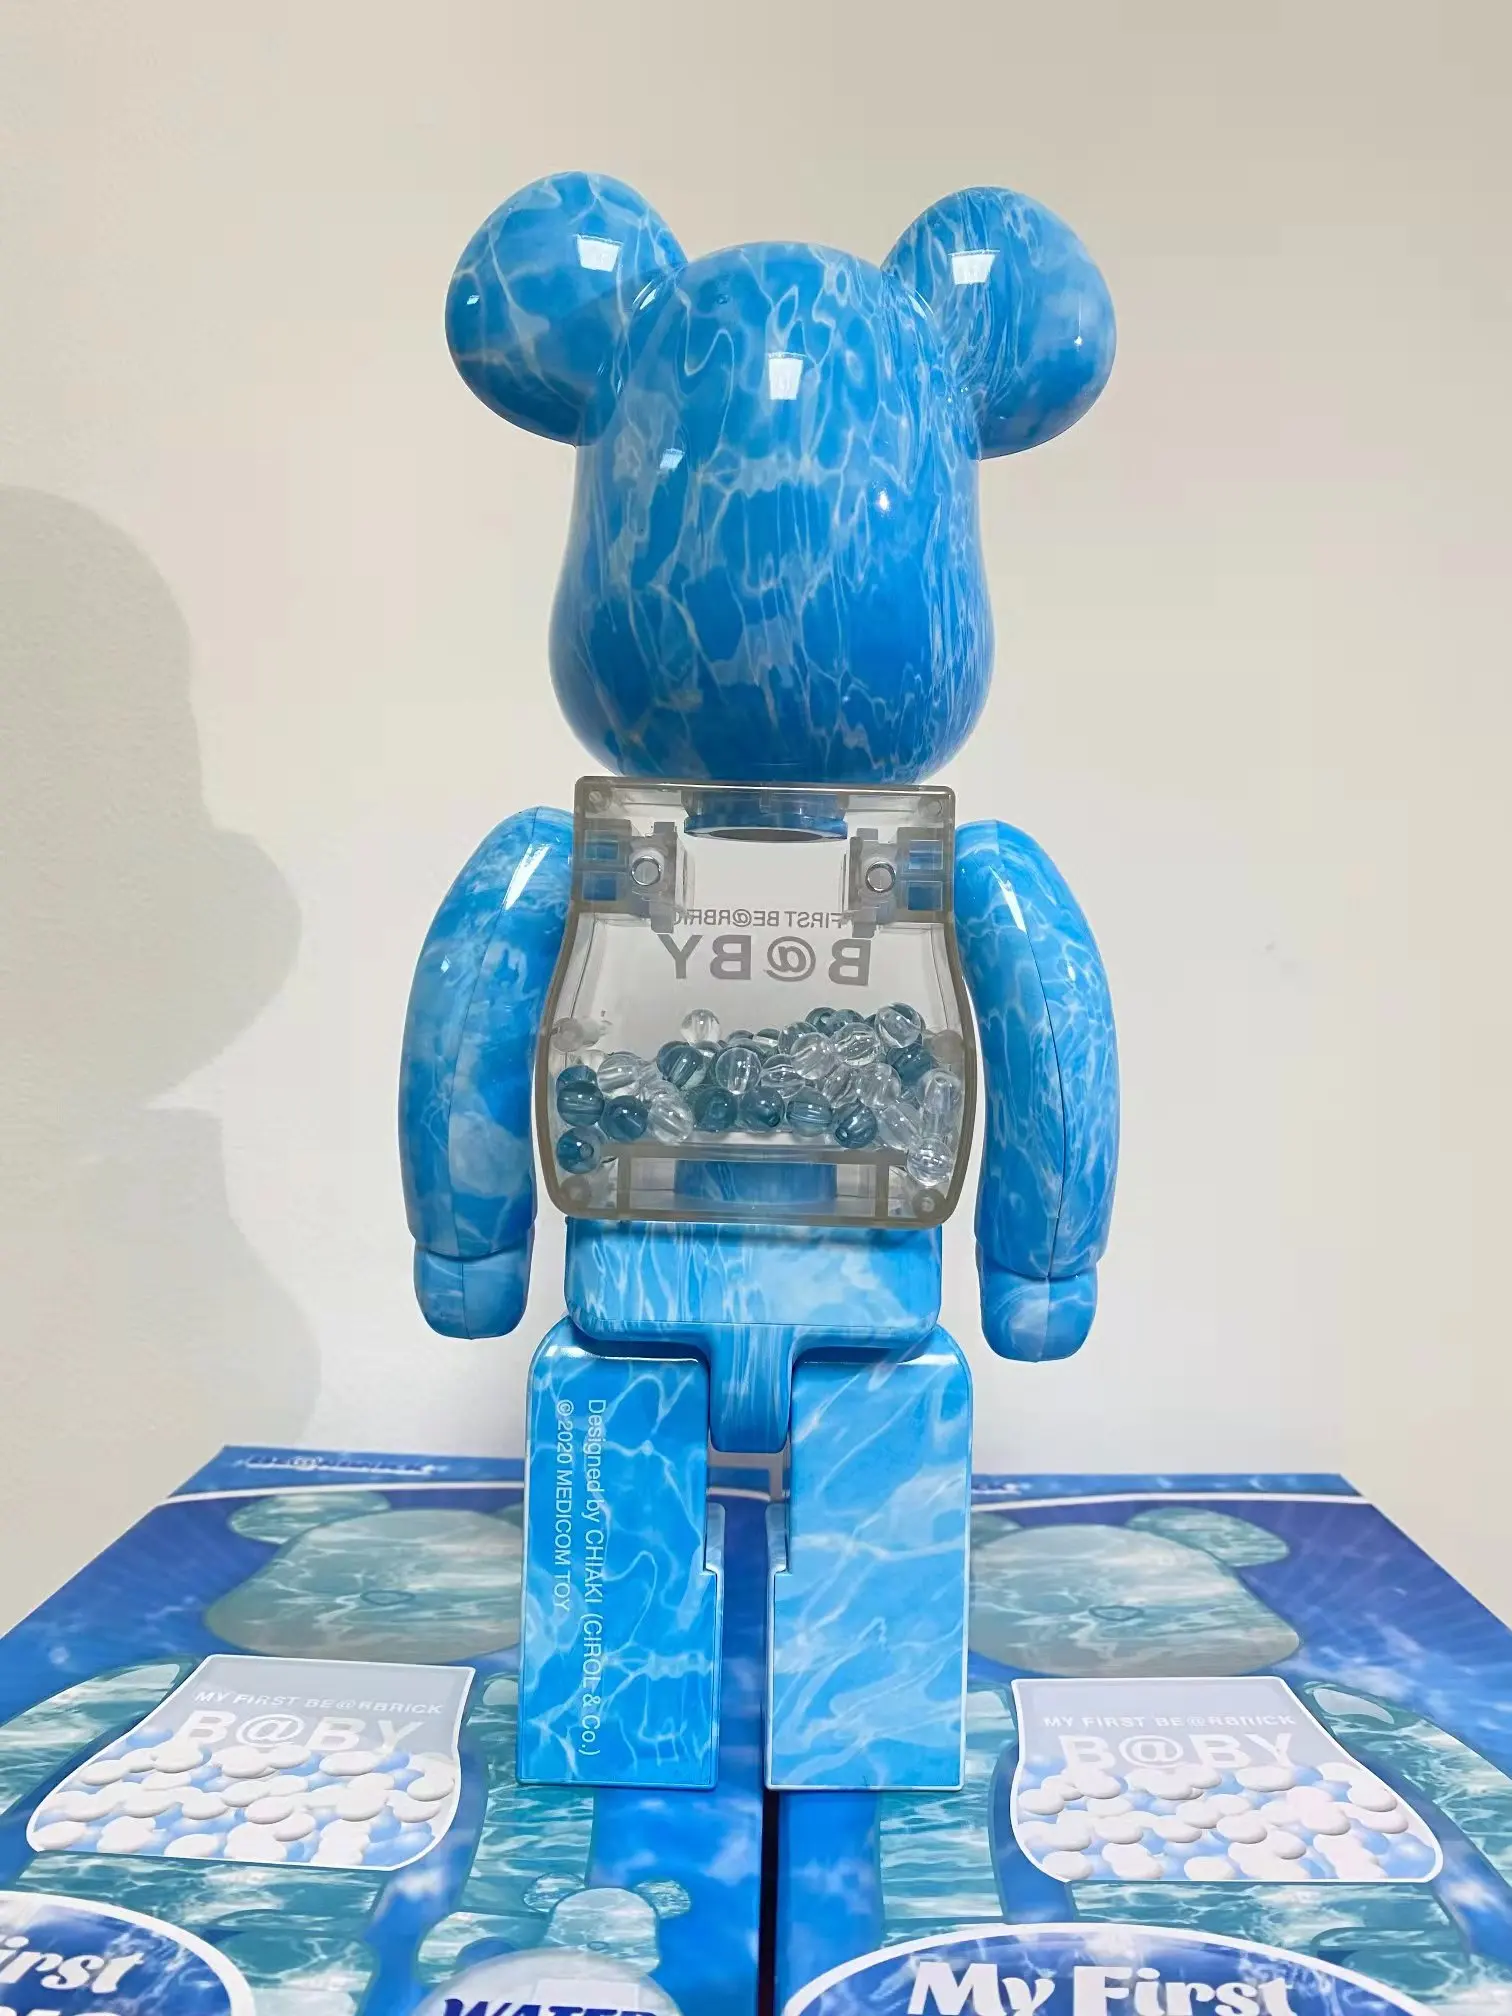 

Bearbrick 400% Water ripple Model 400% high 28cm MY FIRST BE@RBRICK B@BY WATER CREST Ver.